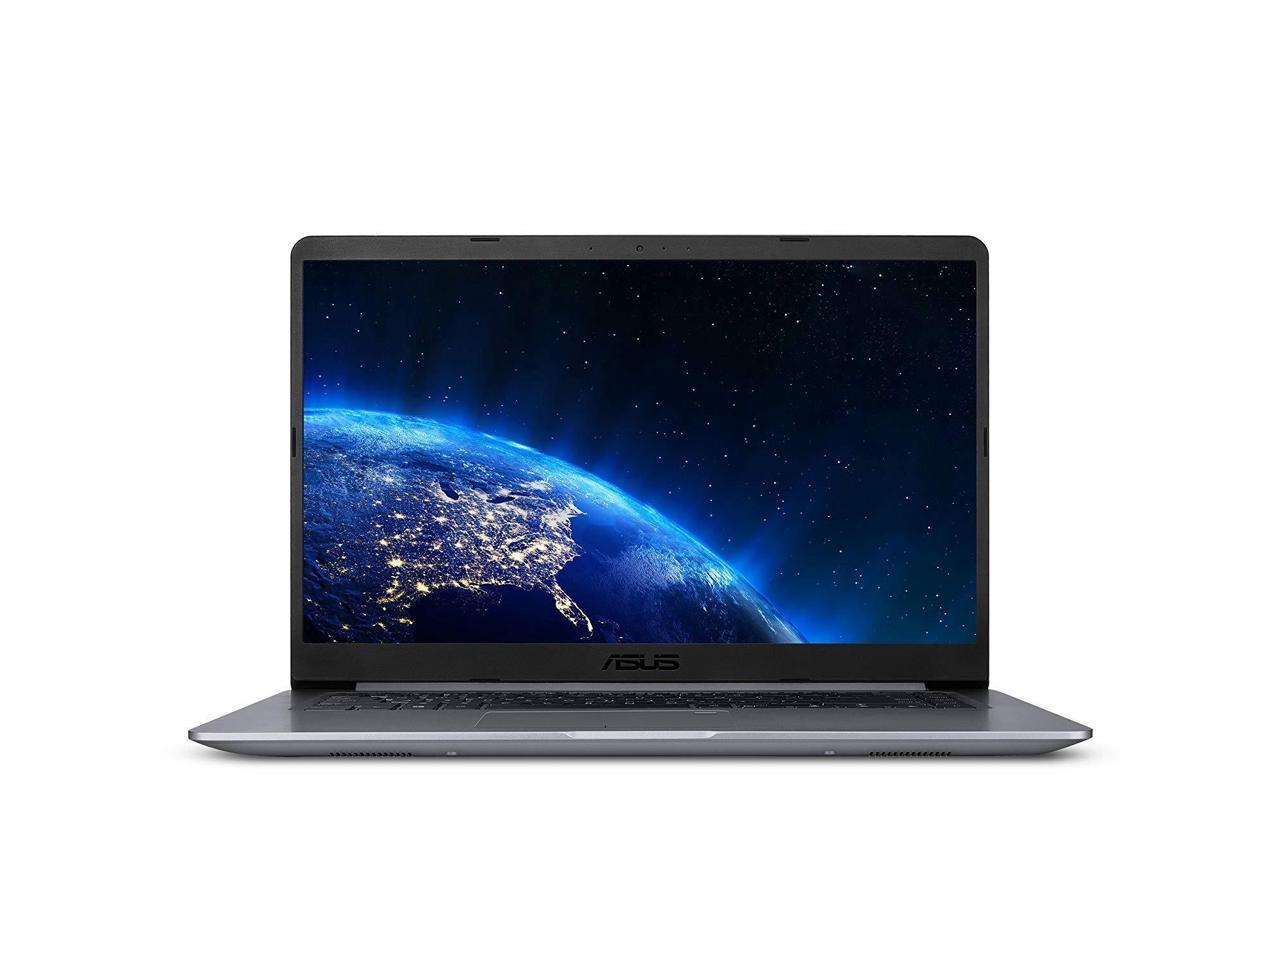 Newest Asus VivoBook Thin & Lightweight Laptop (12G DDR4/512G SSD+1TB HDD)|15.6" Full HD(1920x1080) WideView display| AMD Quad Core A12-9720P Processor| Wi-Fi |Fingerprint Reader|Windows 10 in S Mode